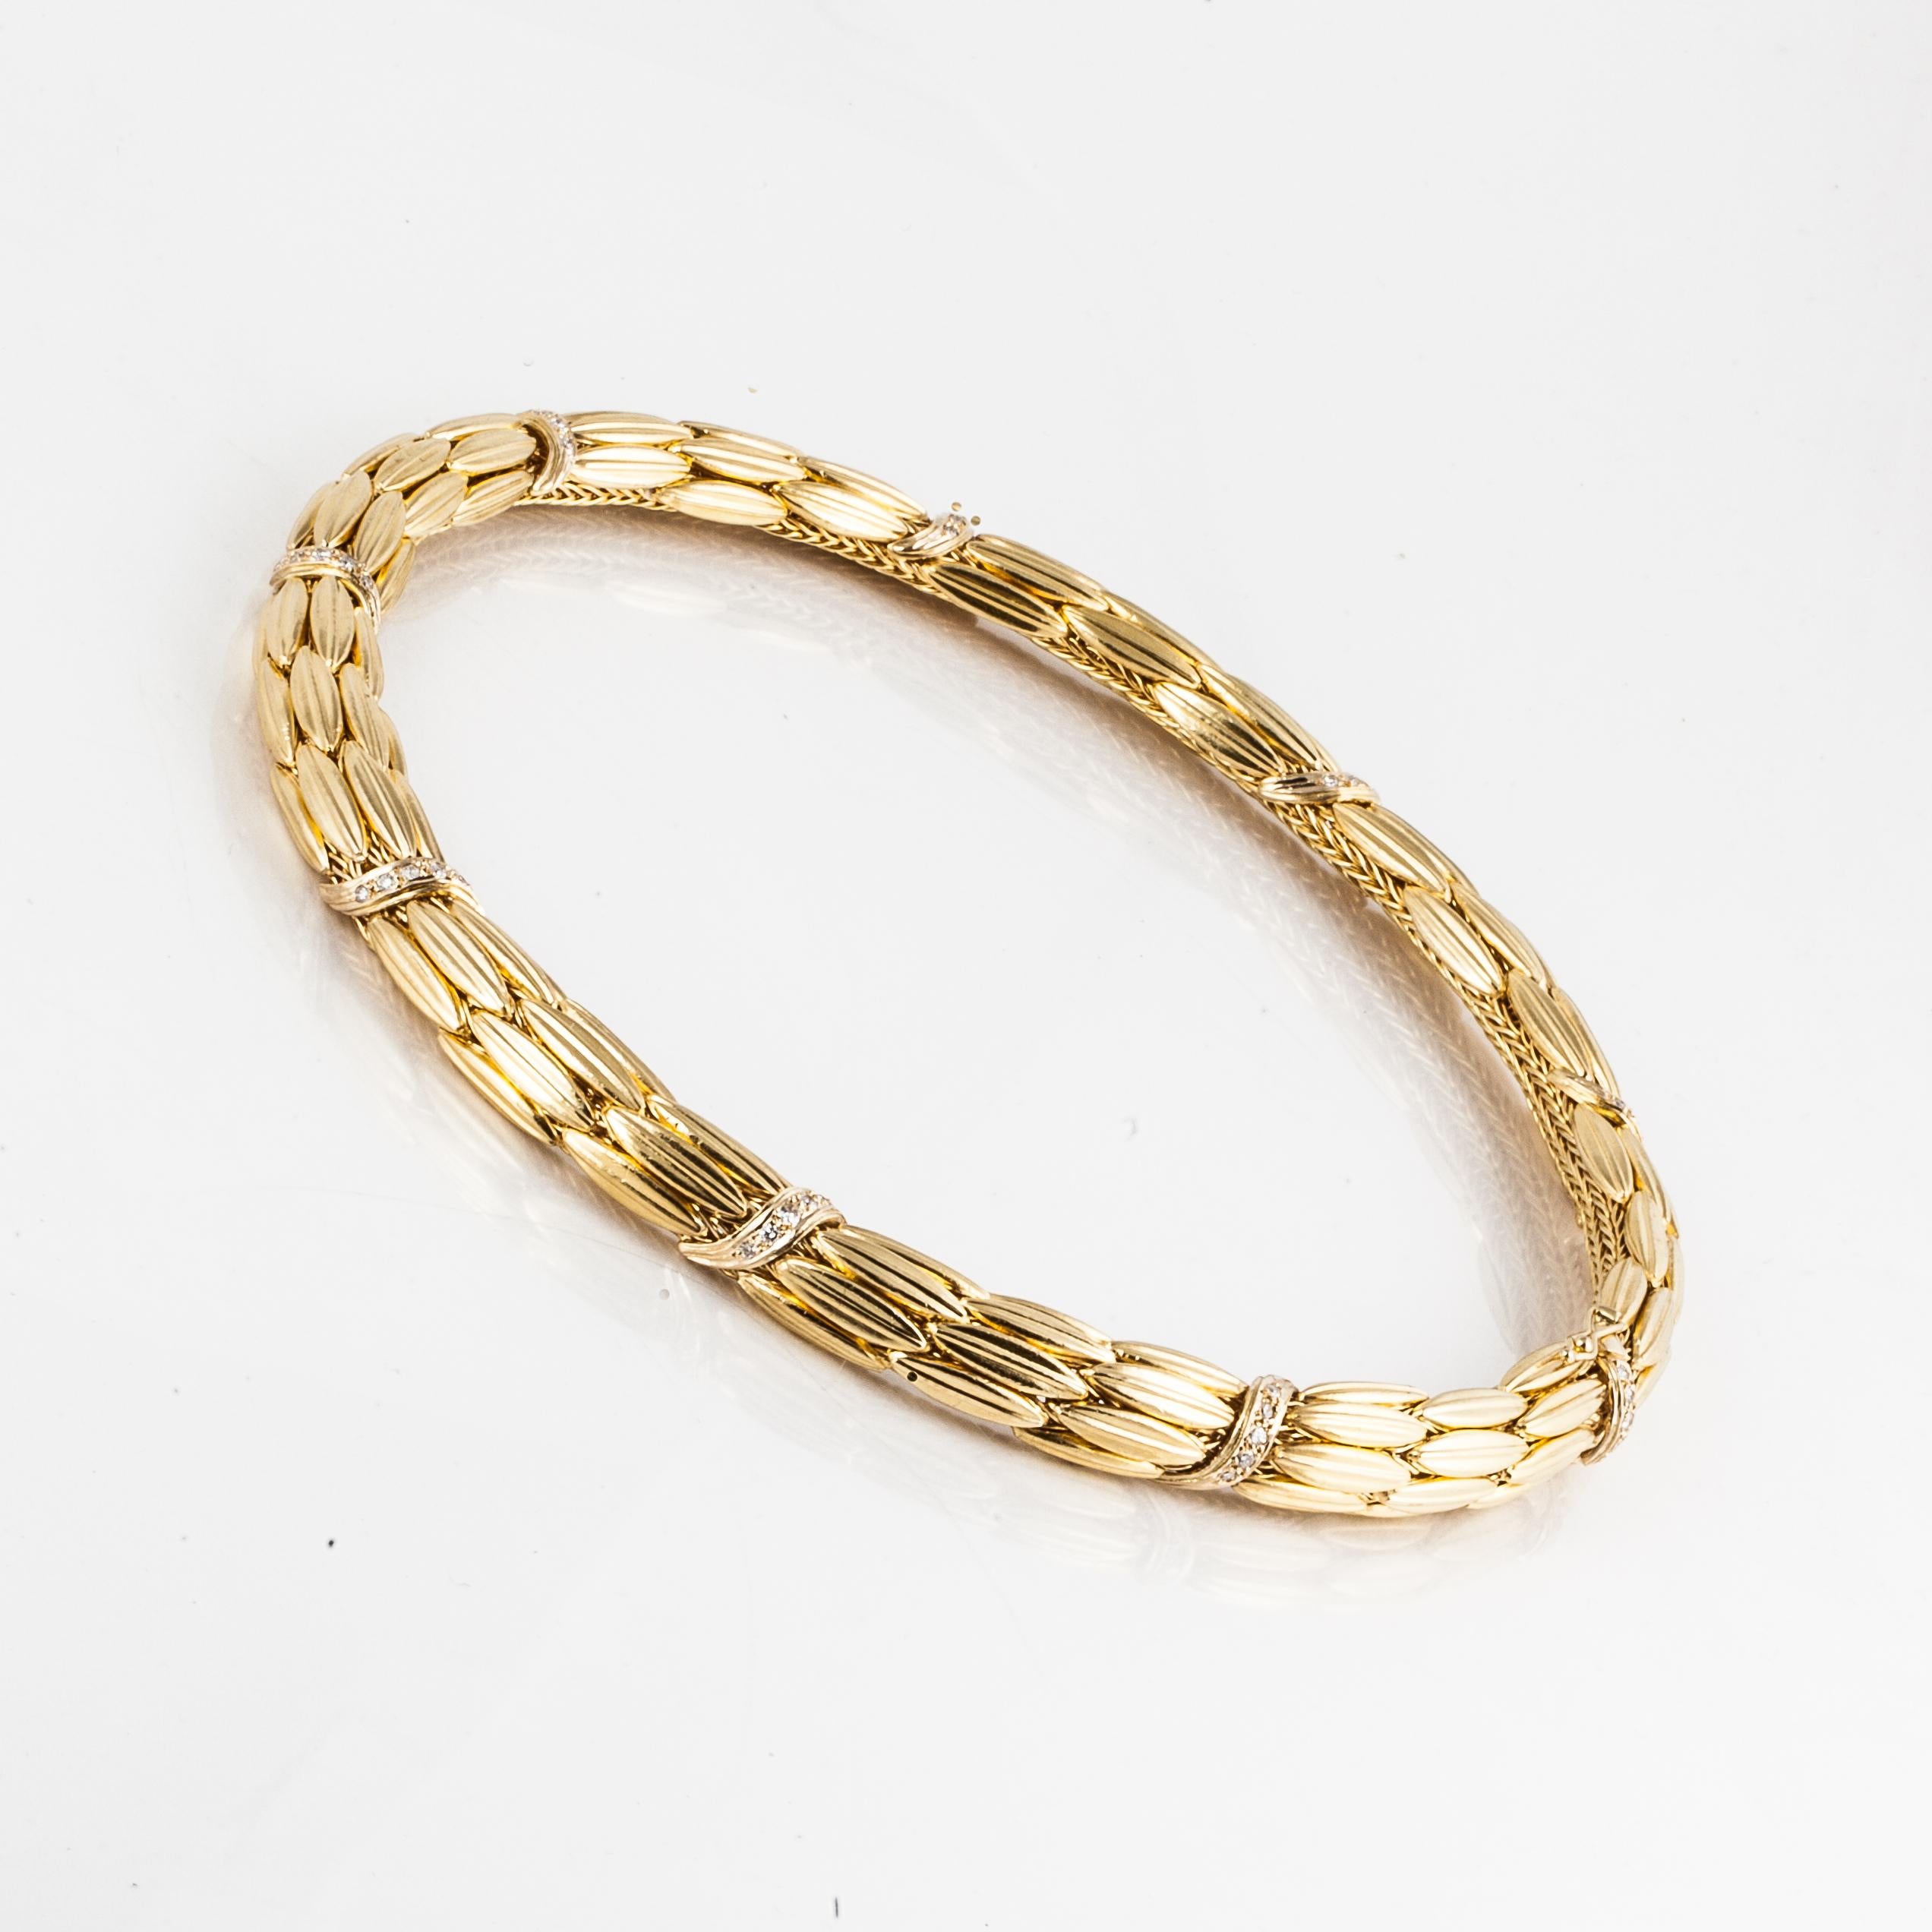 Lalaounis wheat pattern collar style necklace accented with diamonds in 18K yellow gold.  There are forty-five diamonds that total 0.90 carats.  The necklace measures 16 inches long and 3/8 inches wide.